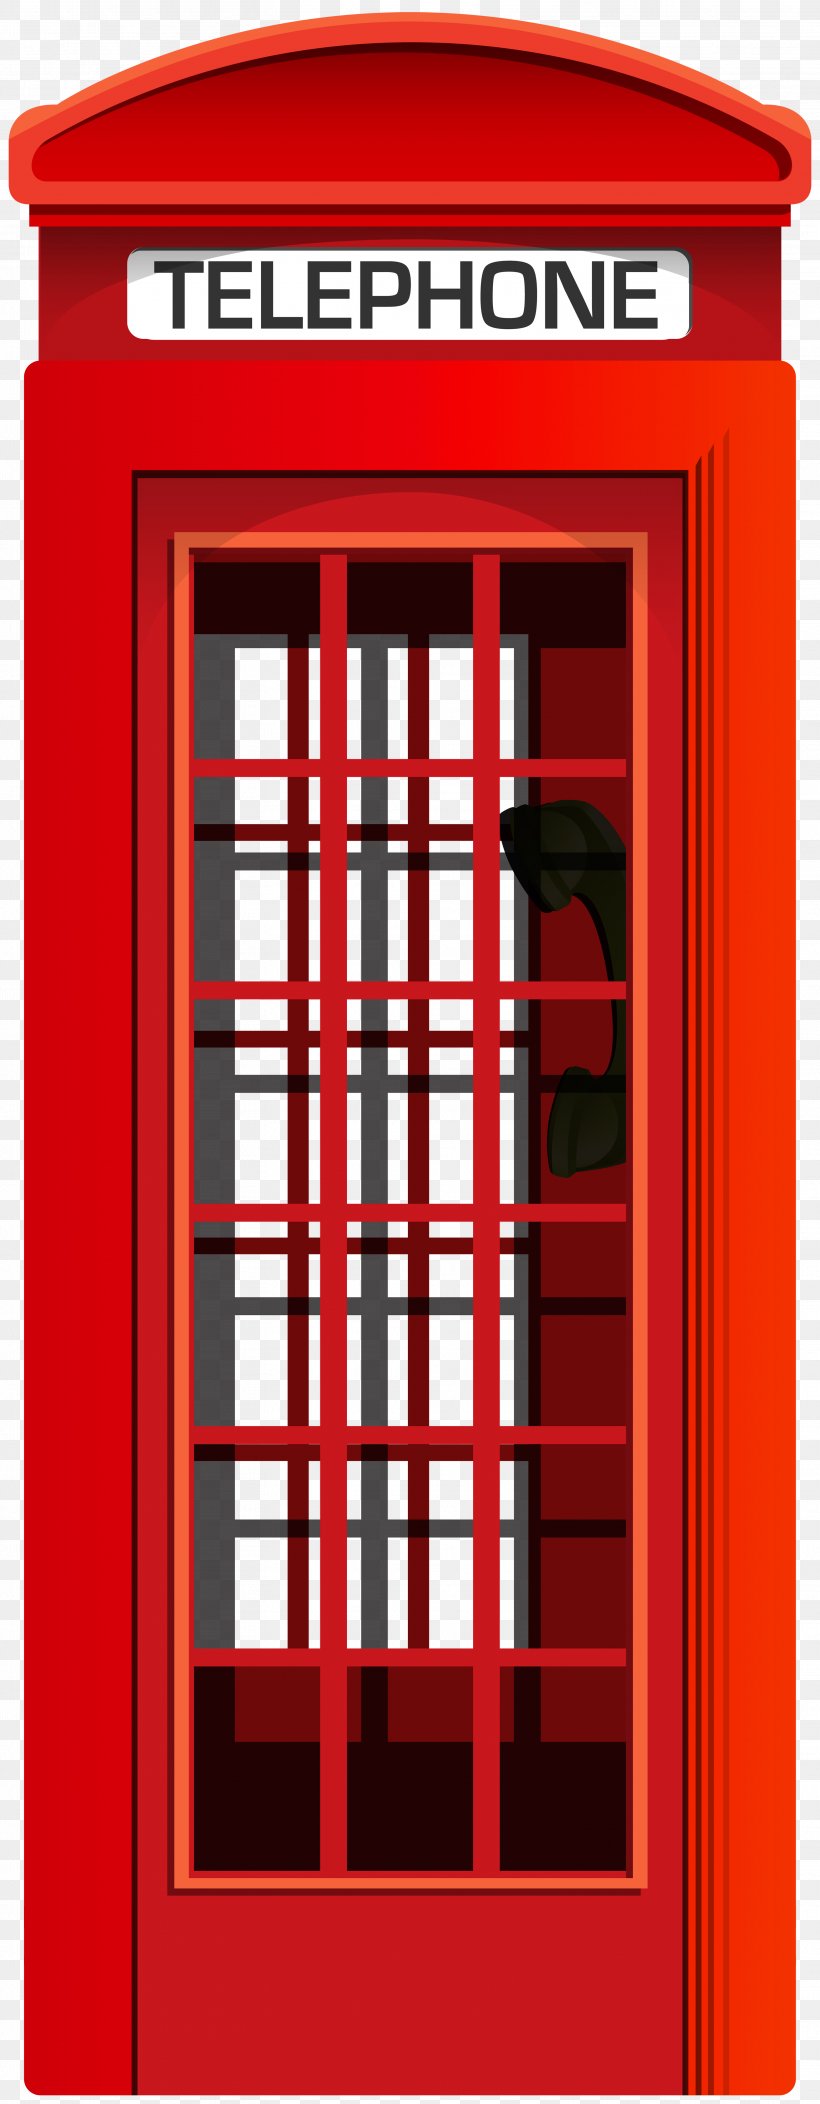 Telephone Booth Clip Art Payphone Image, PNG, 3117x8000px, Telephone Booth, Door, Home Door, Mobile Phones, Payphone Download Free